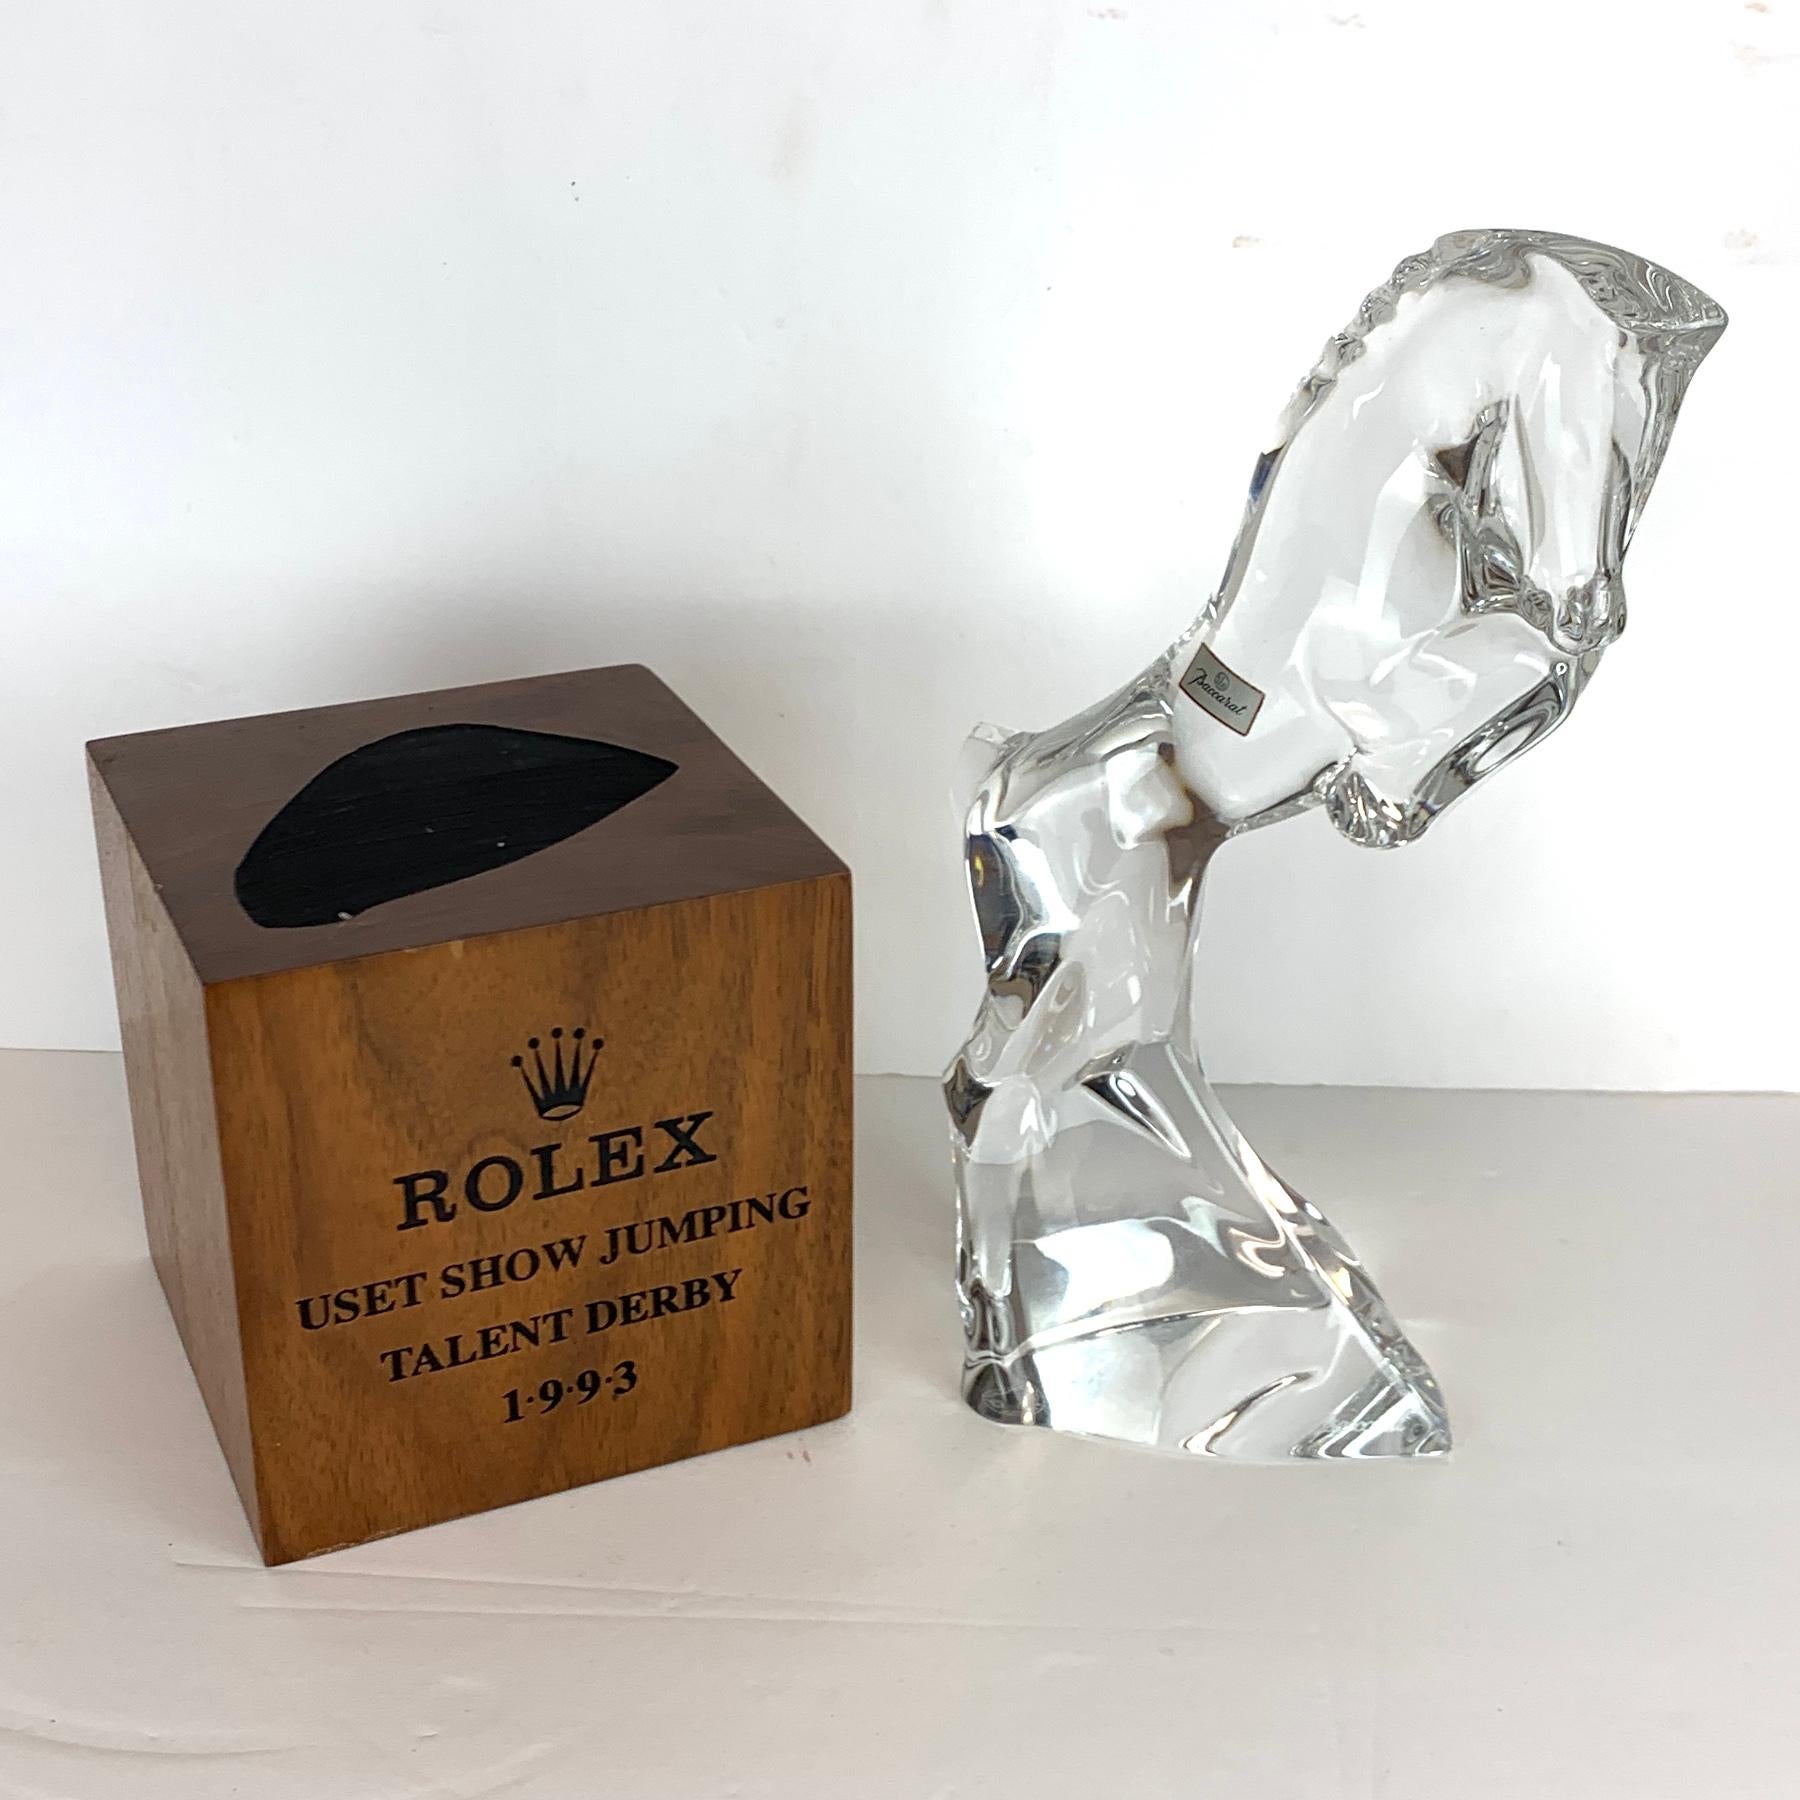 Baccarat Standing Horse Trophy Rolex USET Show Jumping Talent Derby, 1993 2